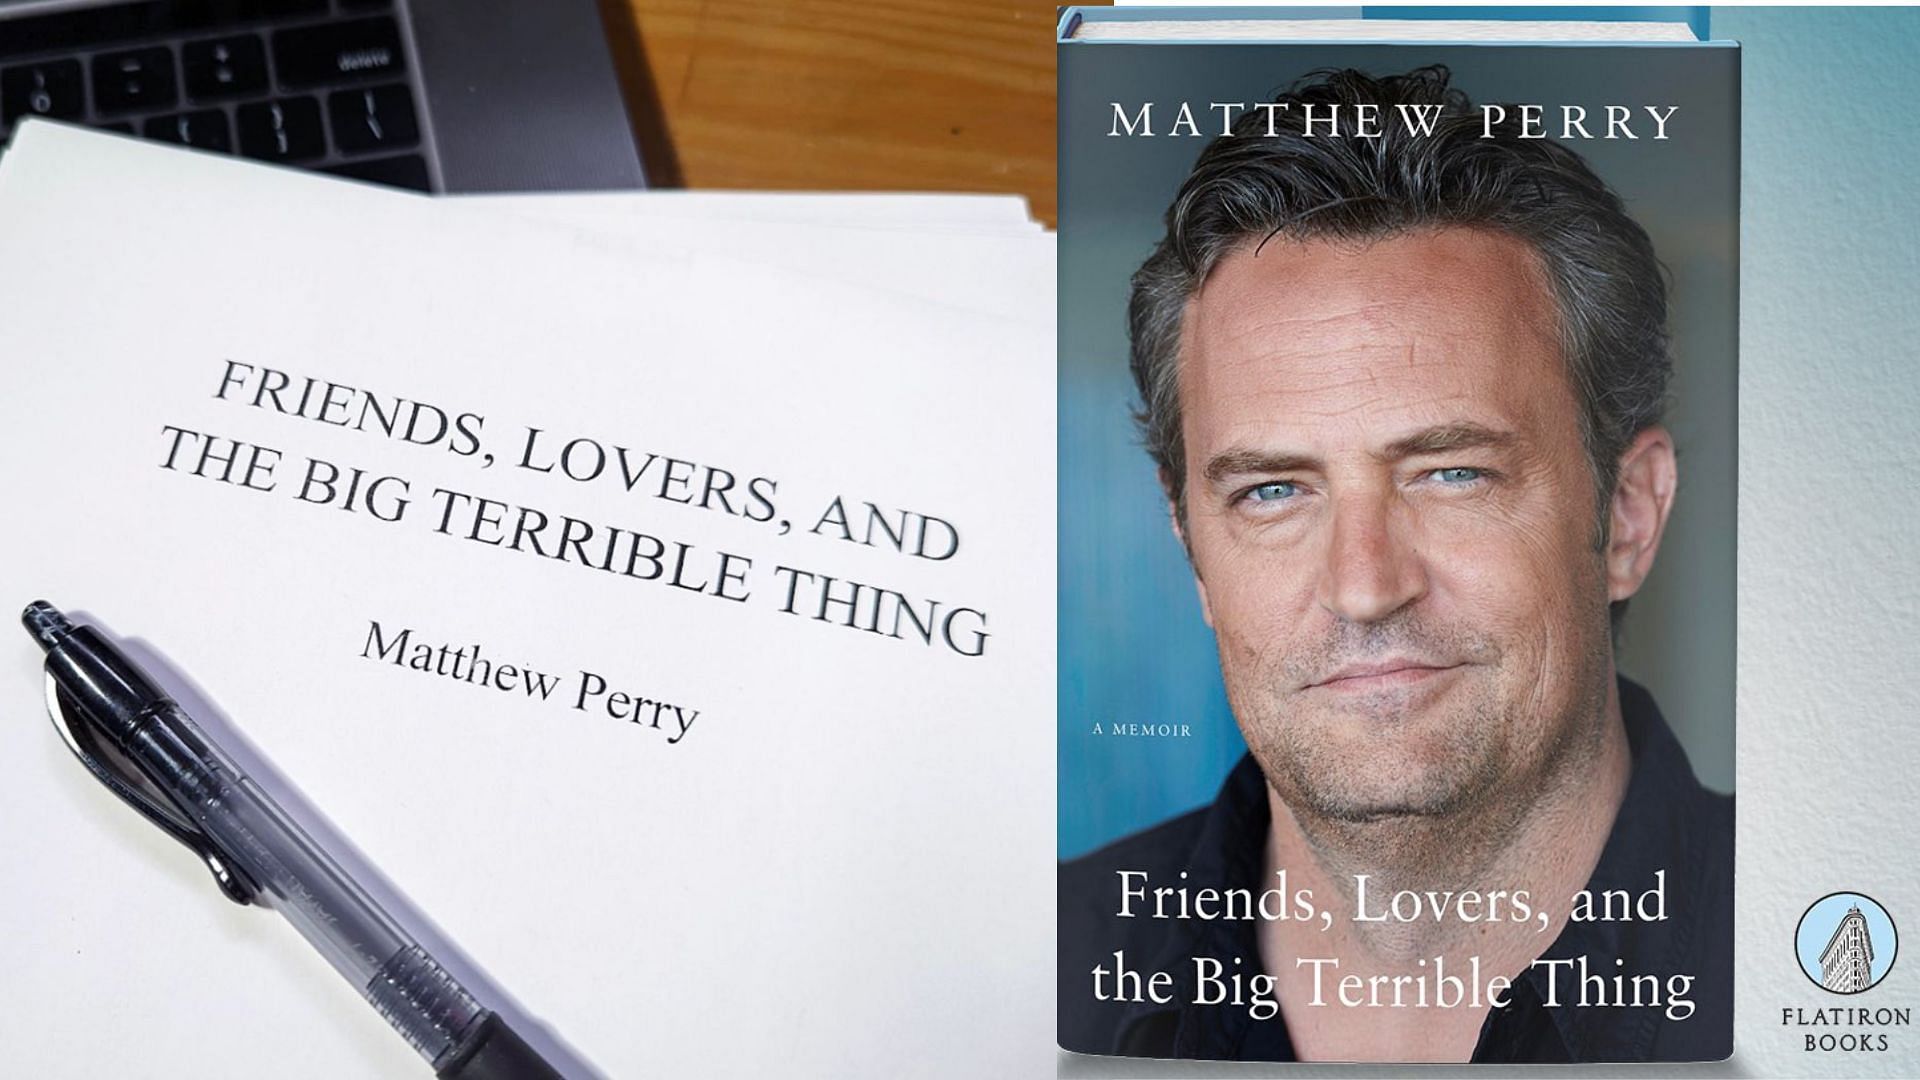 Matthew Perry Has Friends, Lovers, and a Big Terrible Thing